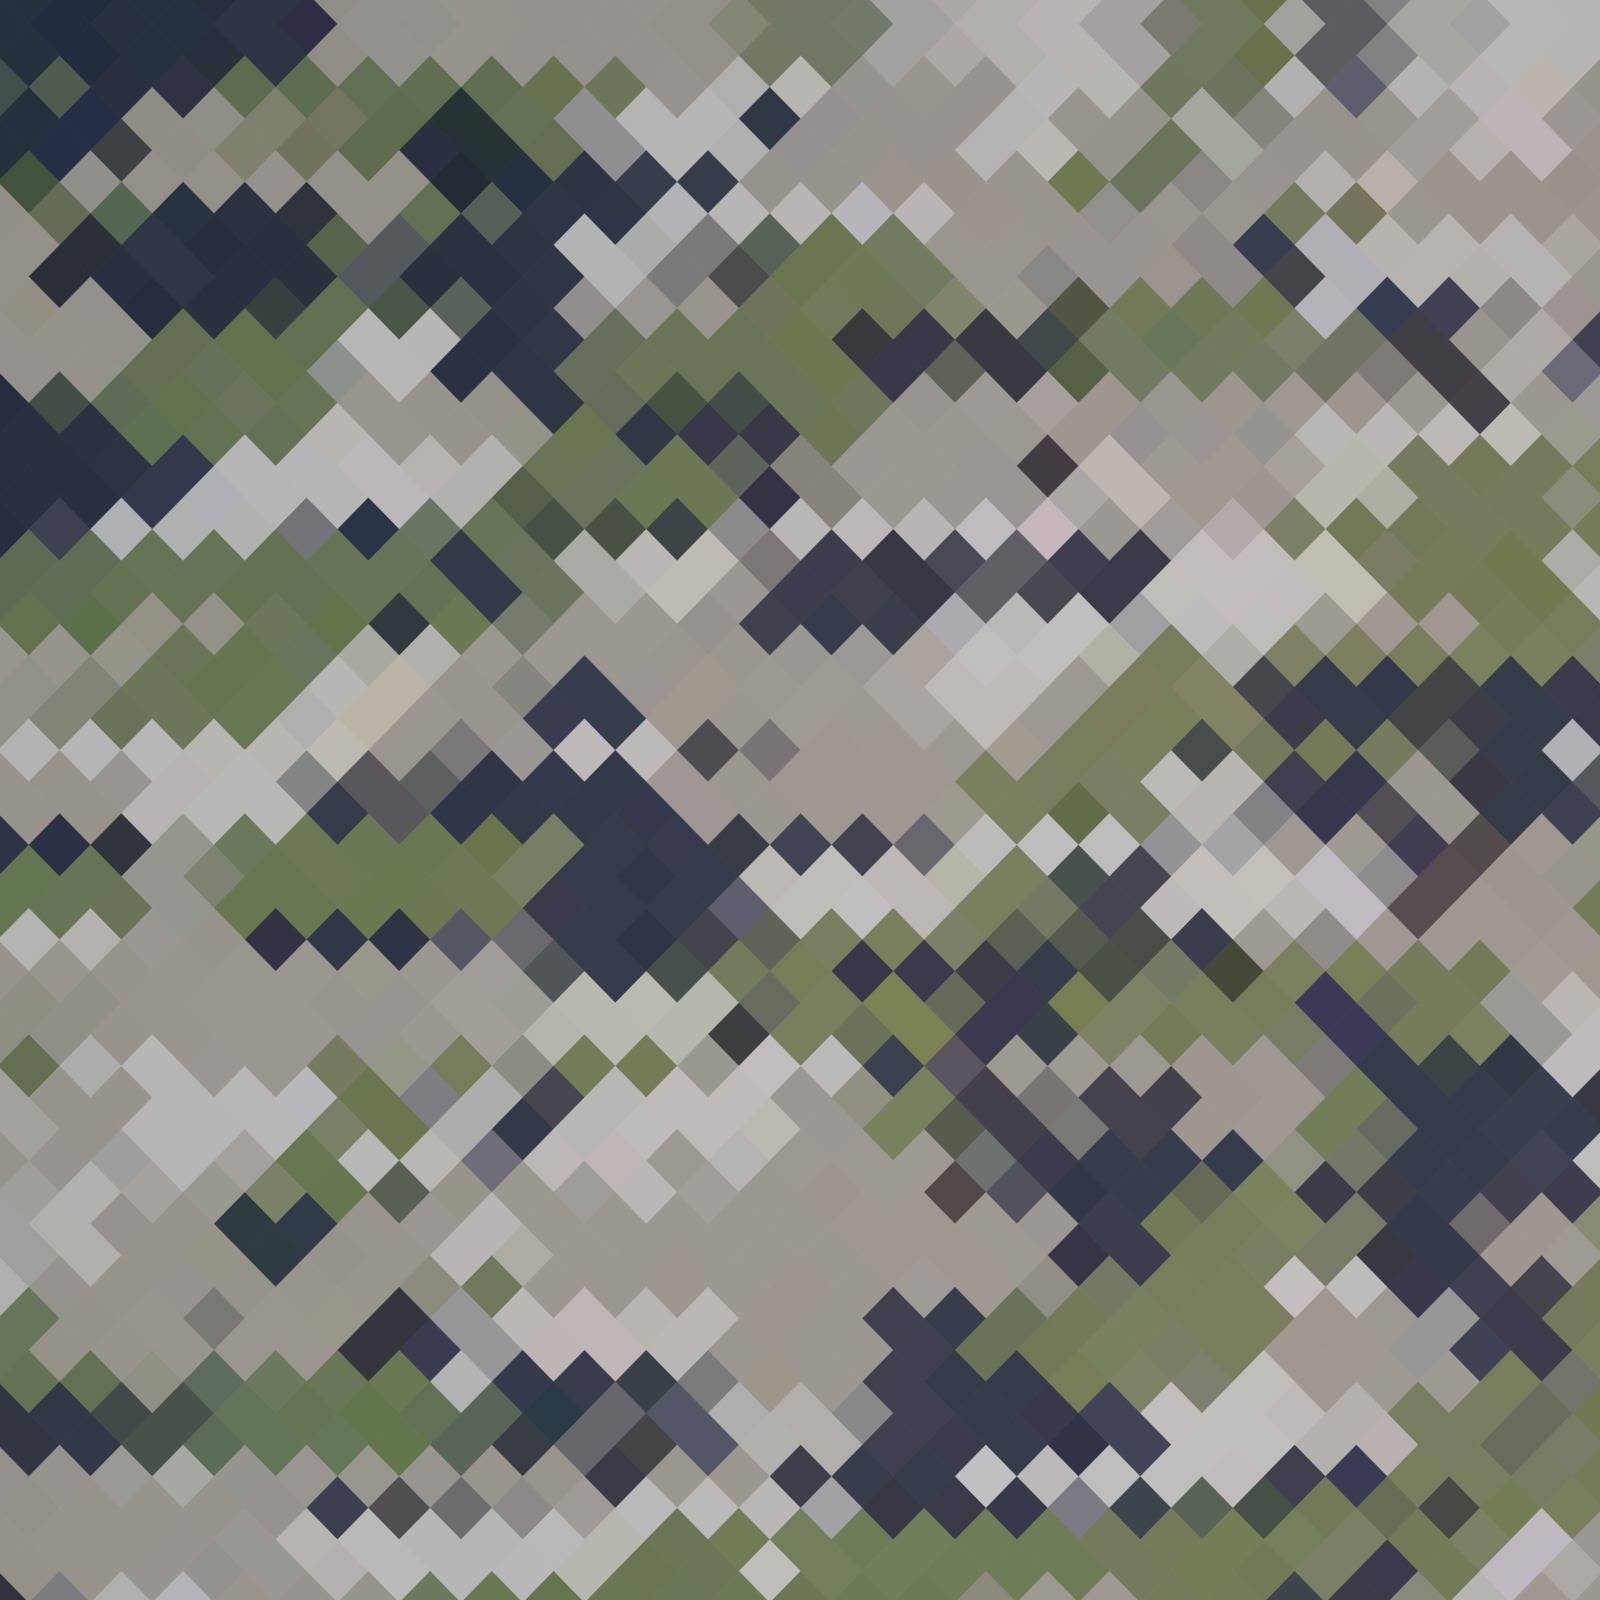 Urban Camouflage Background. Army Military Pattern. Green Pixel Fabric Textile Print for Uniforms and Weapons. by valeo5